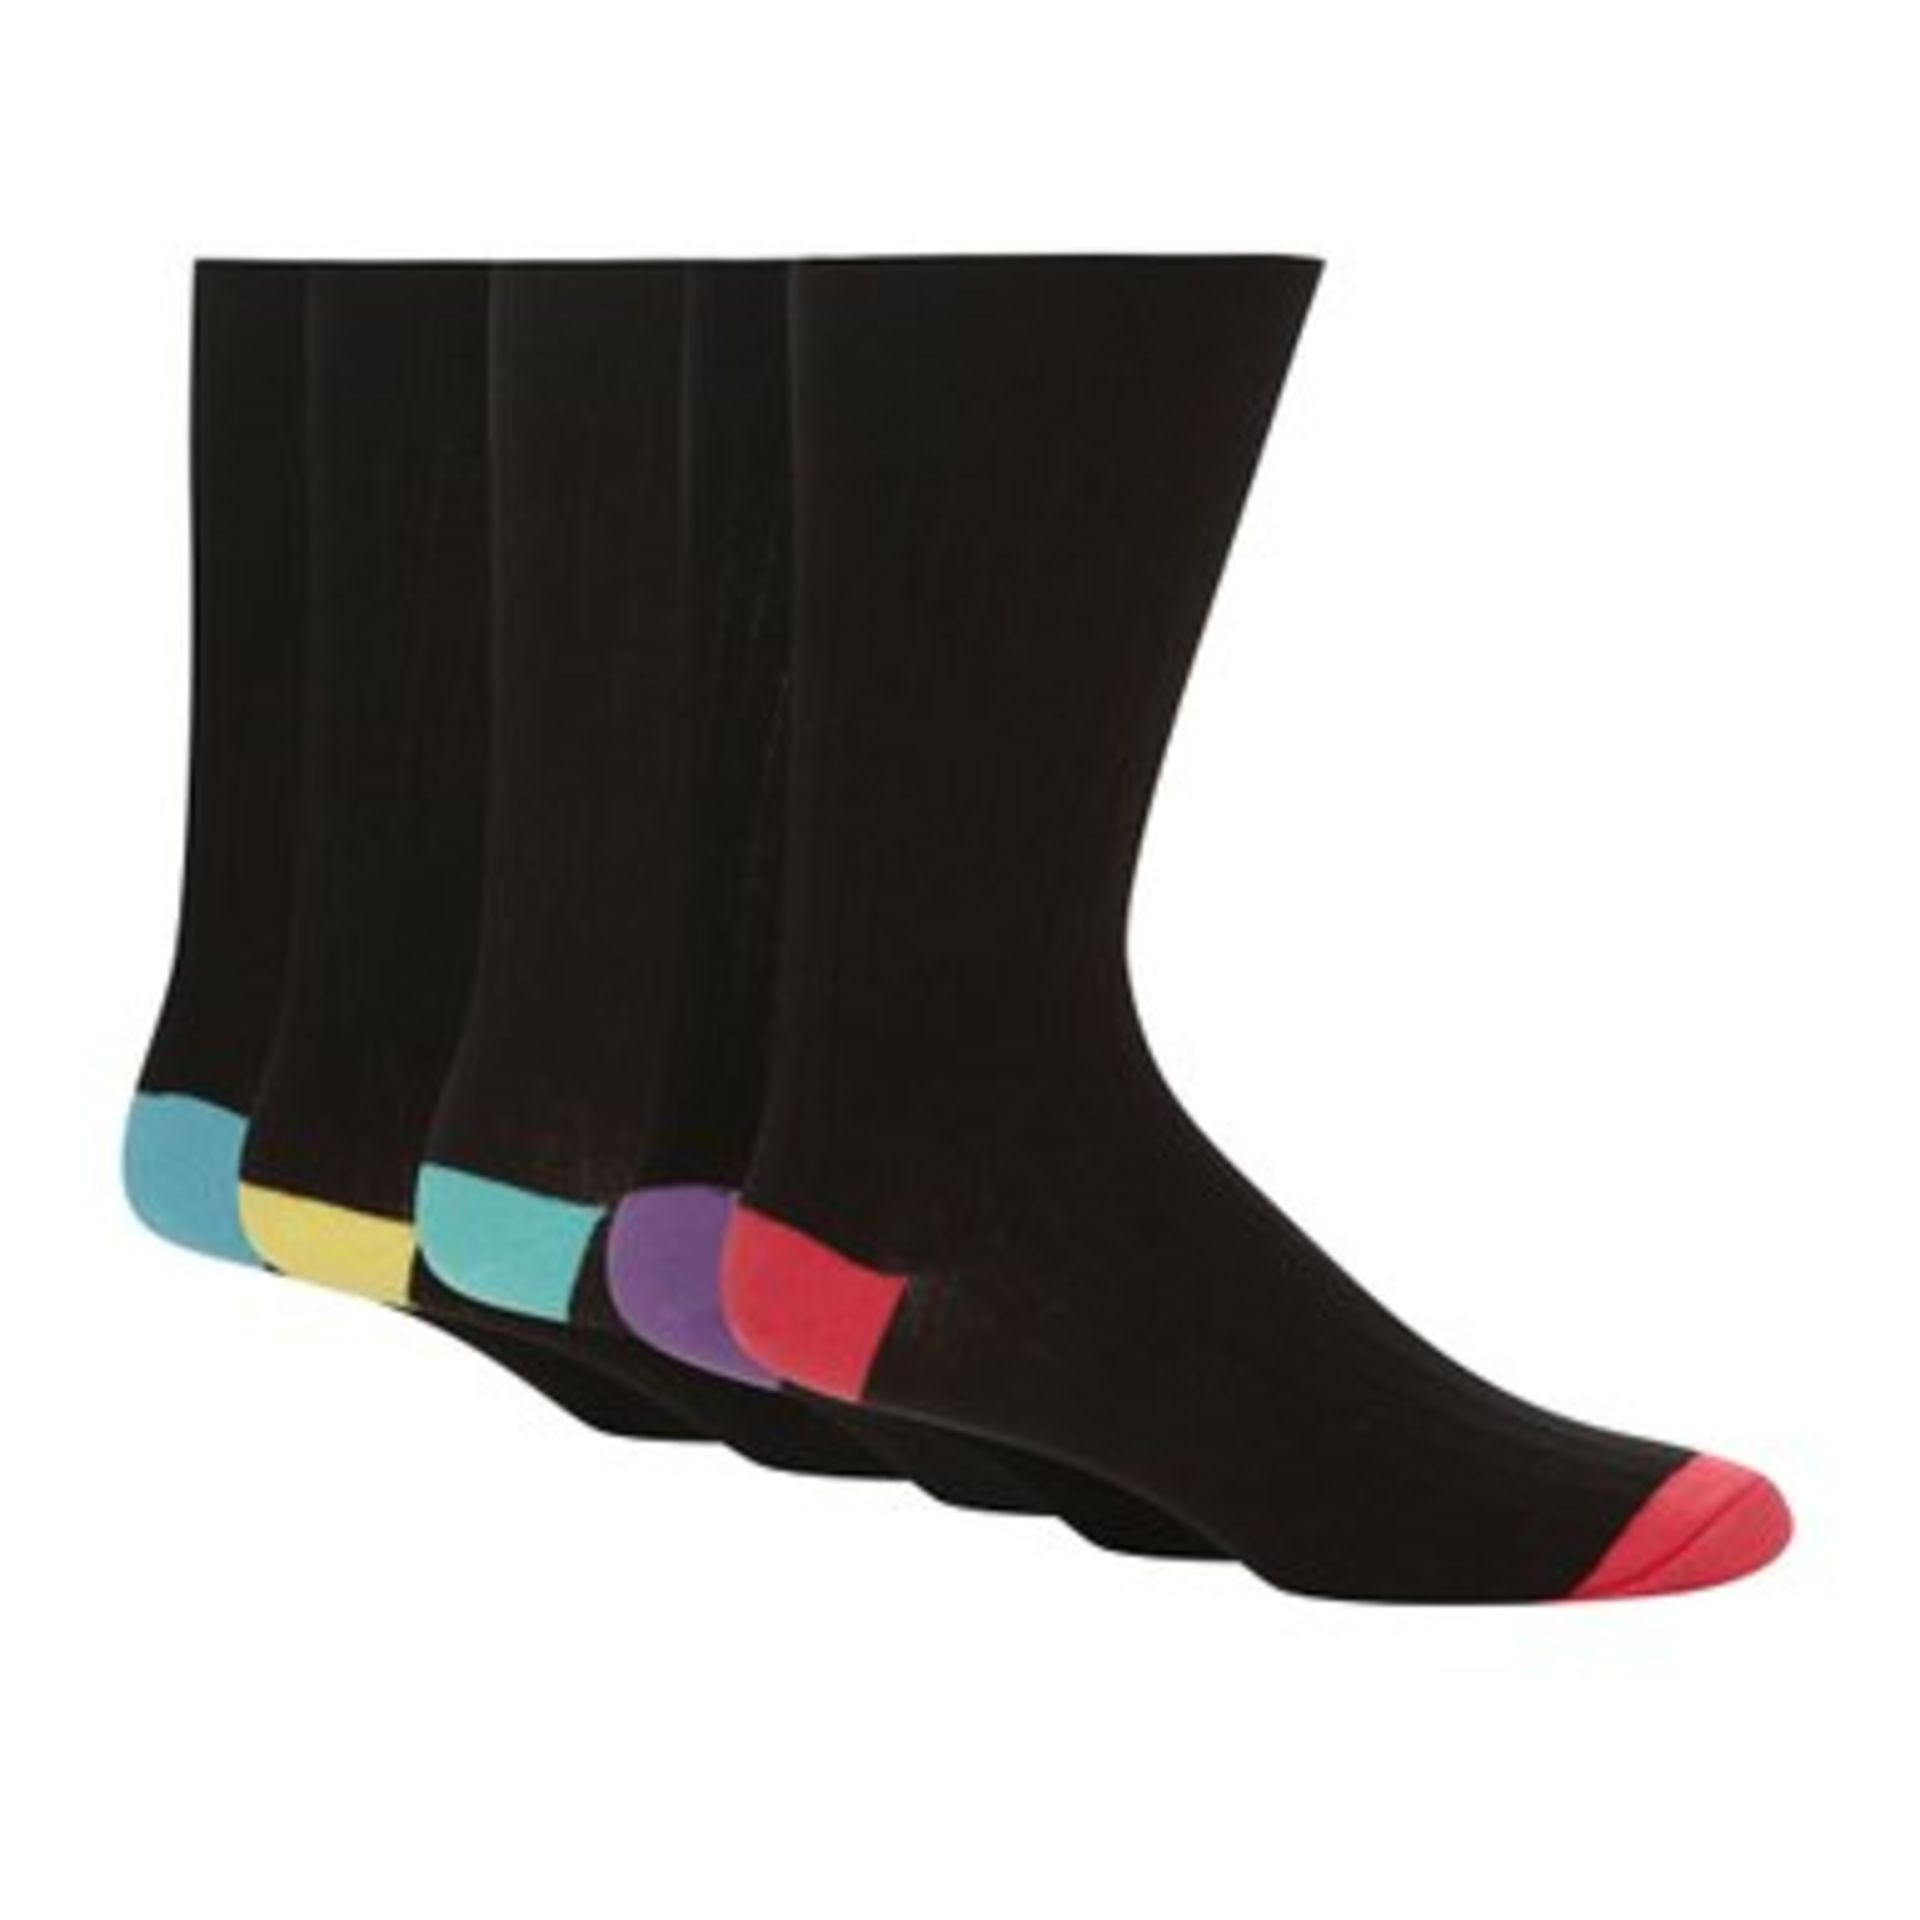 V Brand New A Lot Of Twelve Pairs Gents Socks Size 6-11 (Image is similar) X 2 YOUR BID PRICE TO